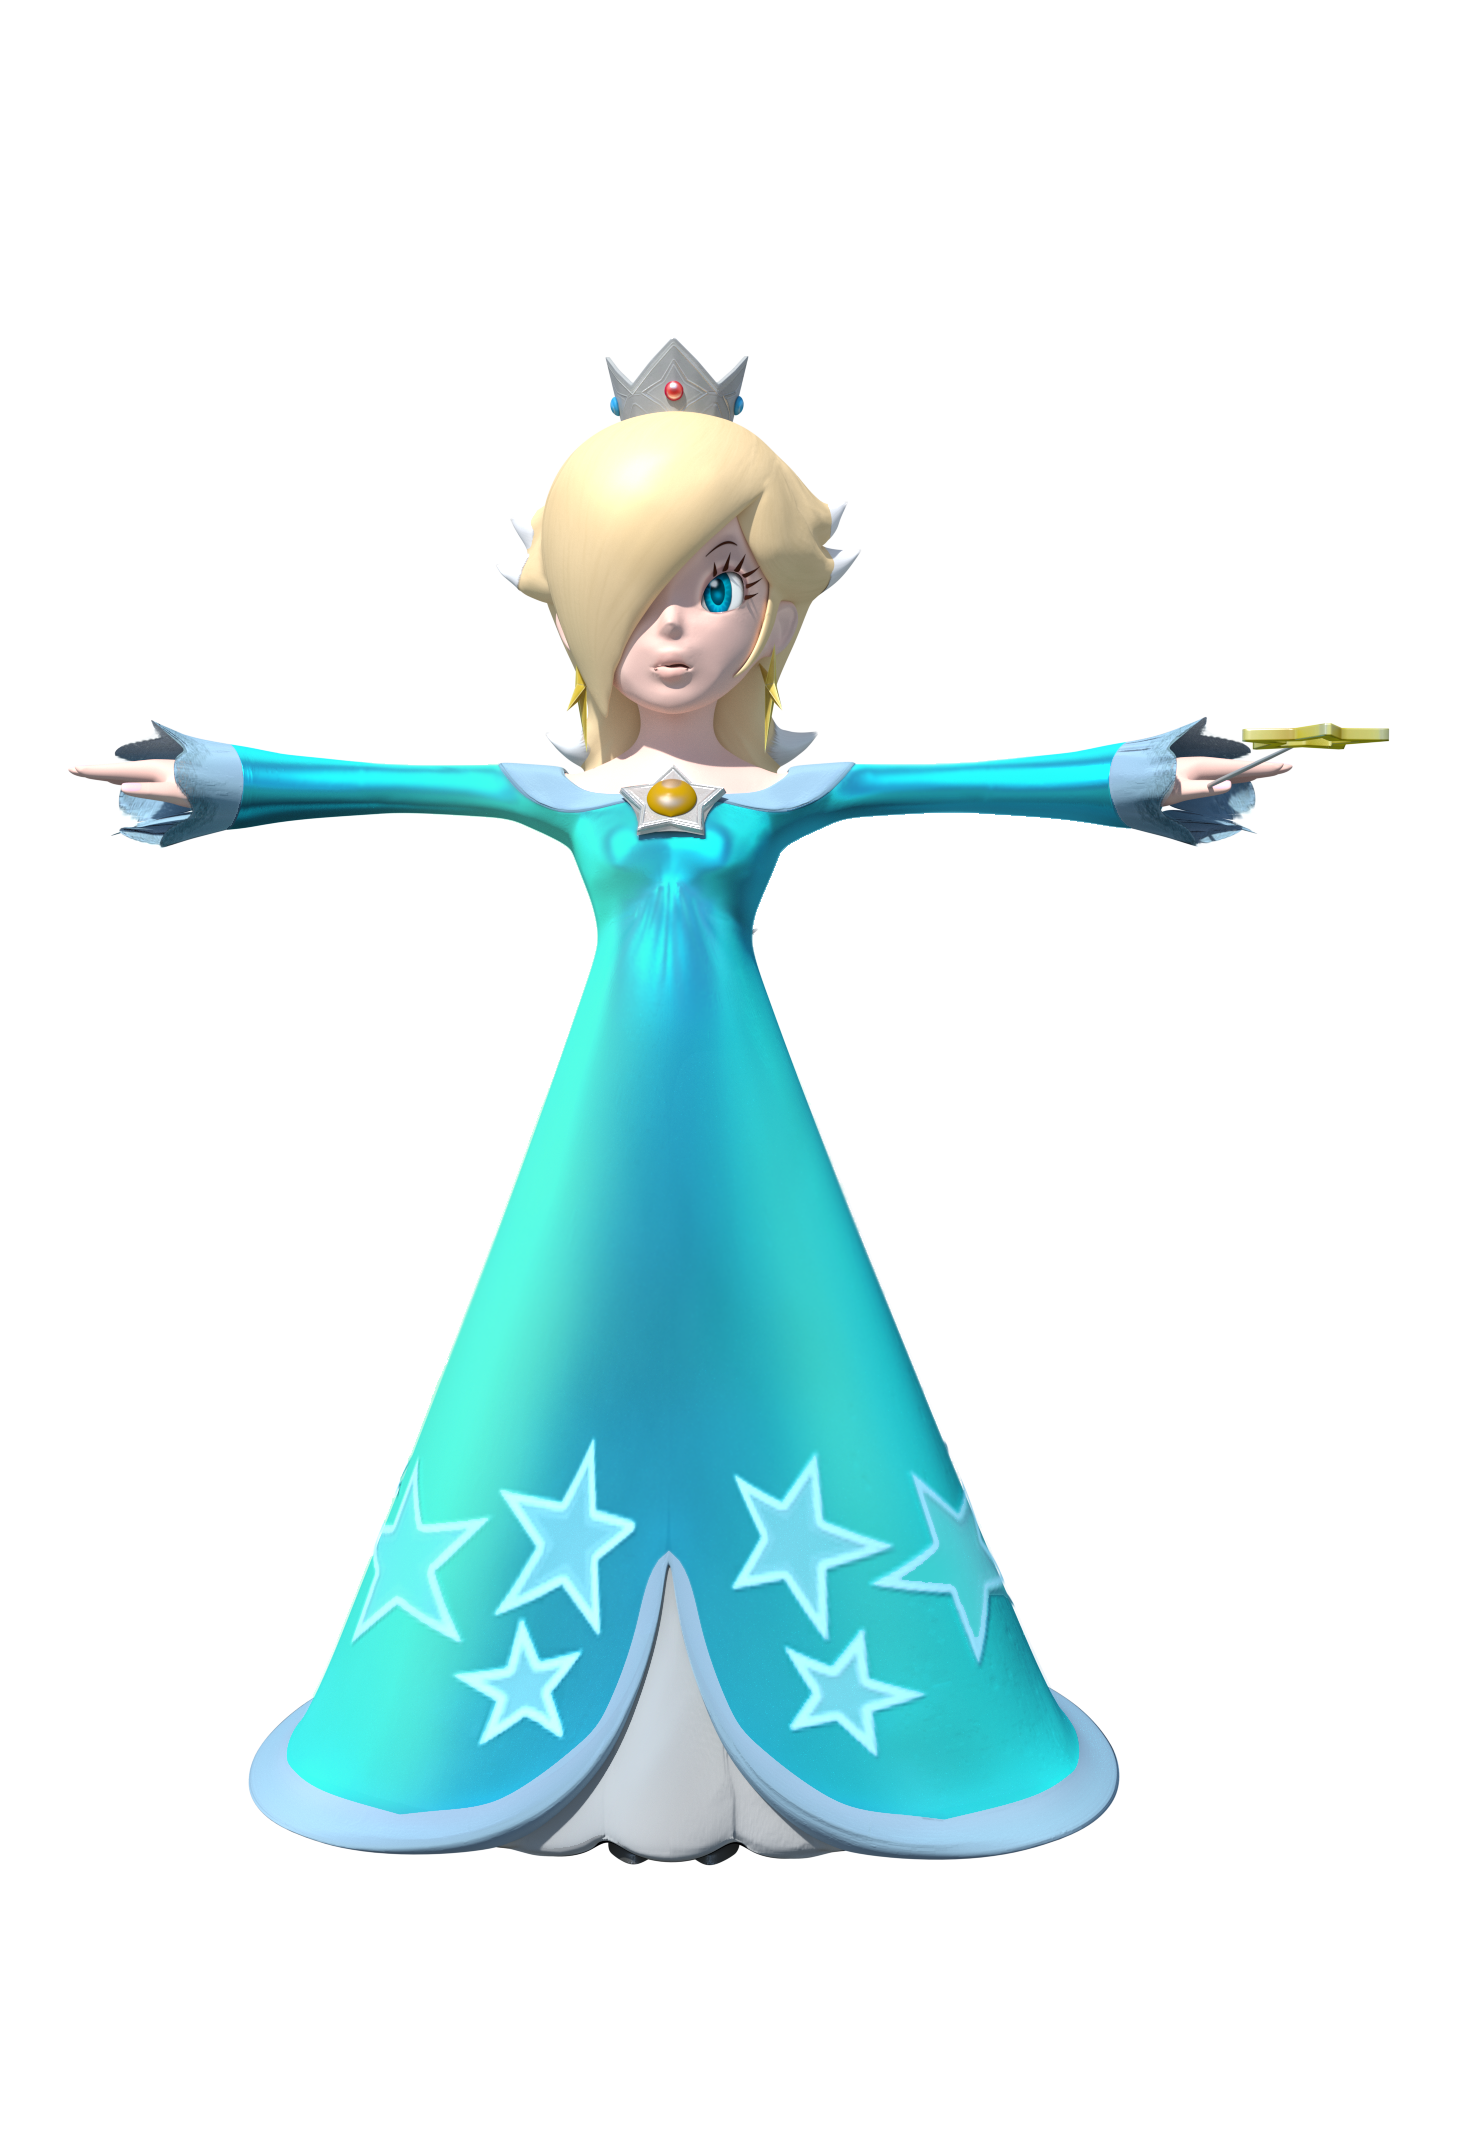 rosalina_render_by_nobody661-d9dgz1f.png